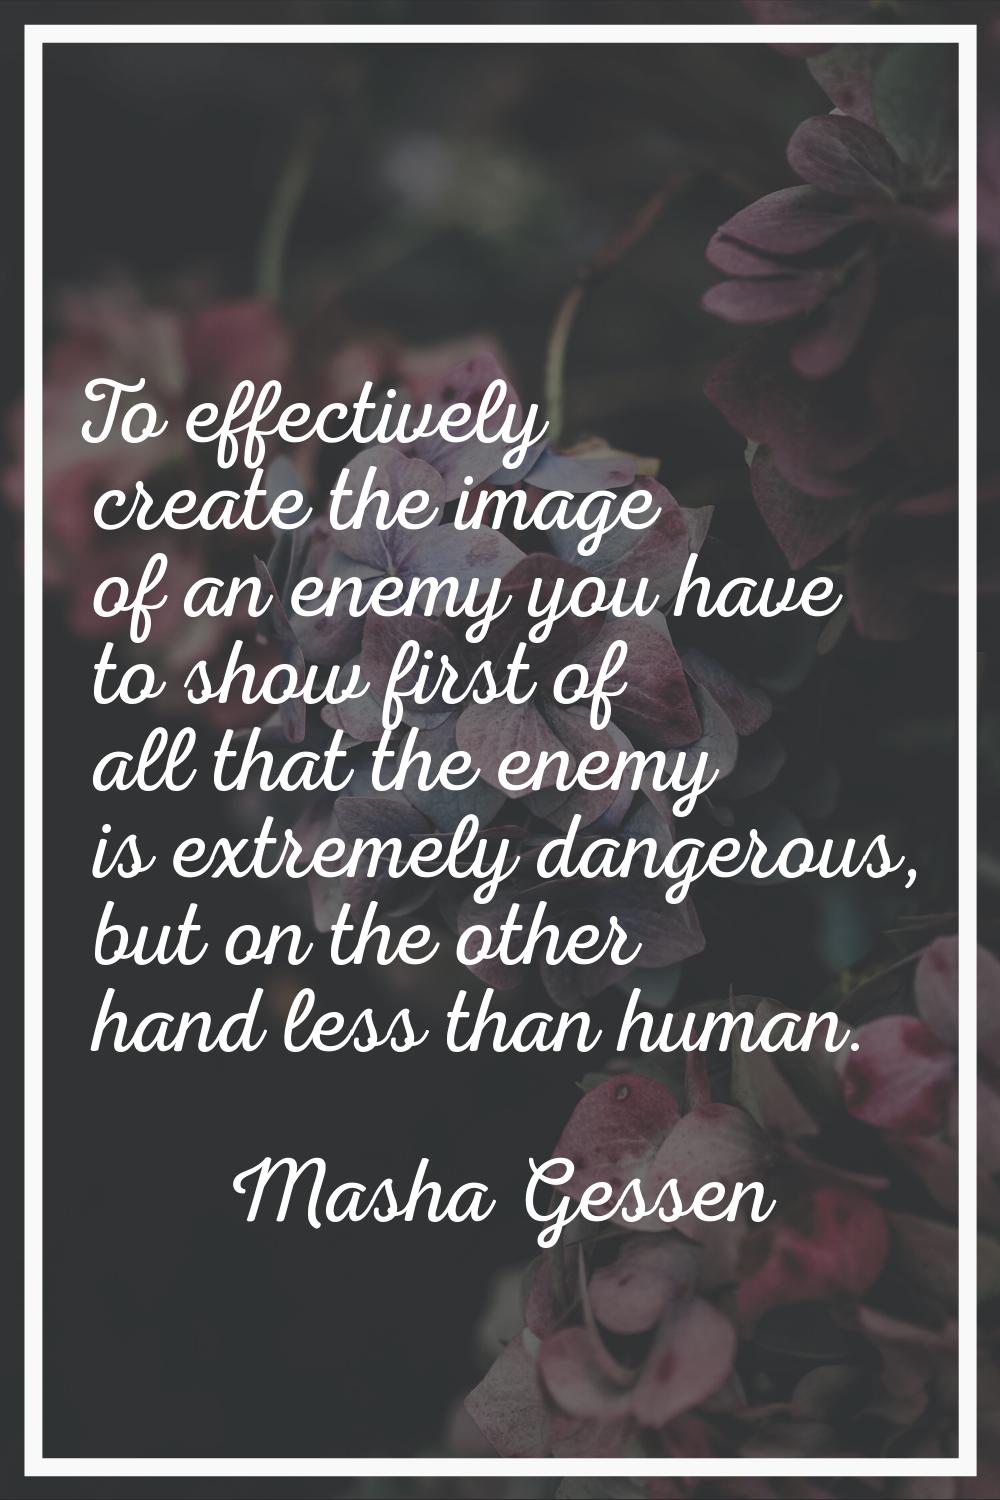 To effectively create the image of an enemy you have to show first of all that the enemy is extreme